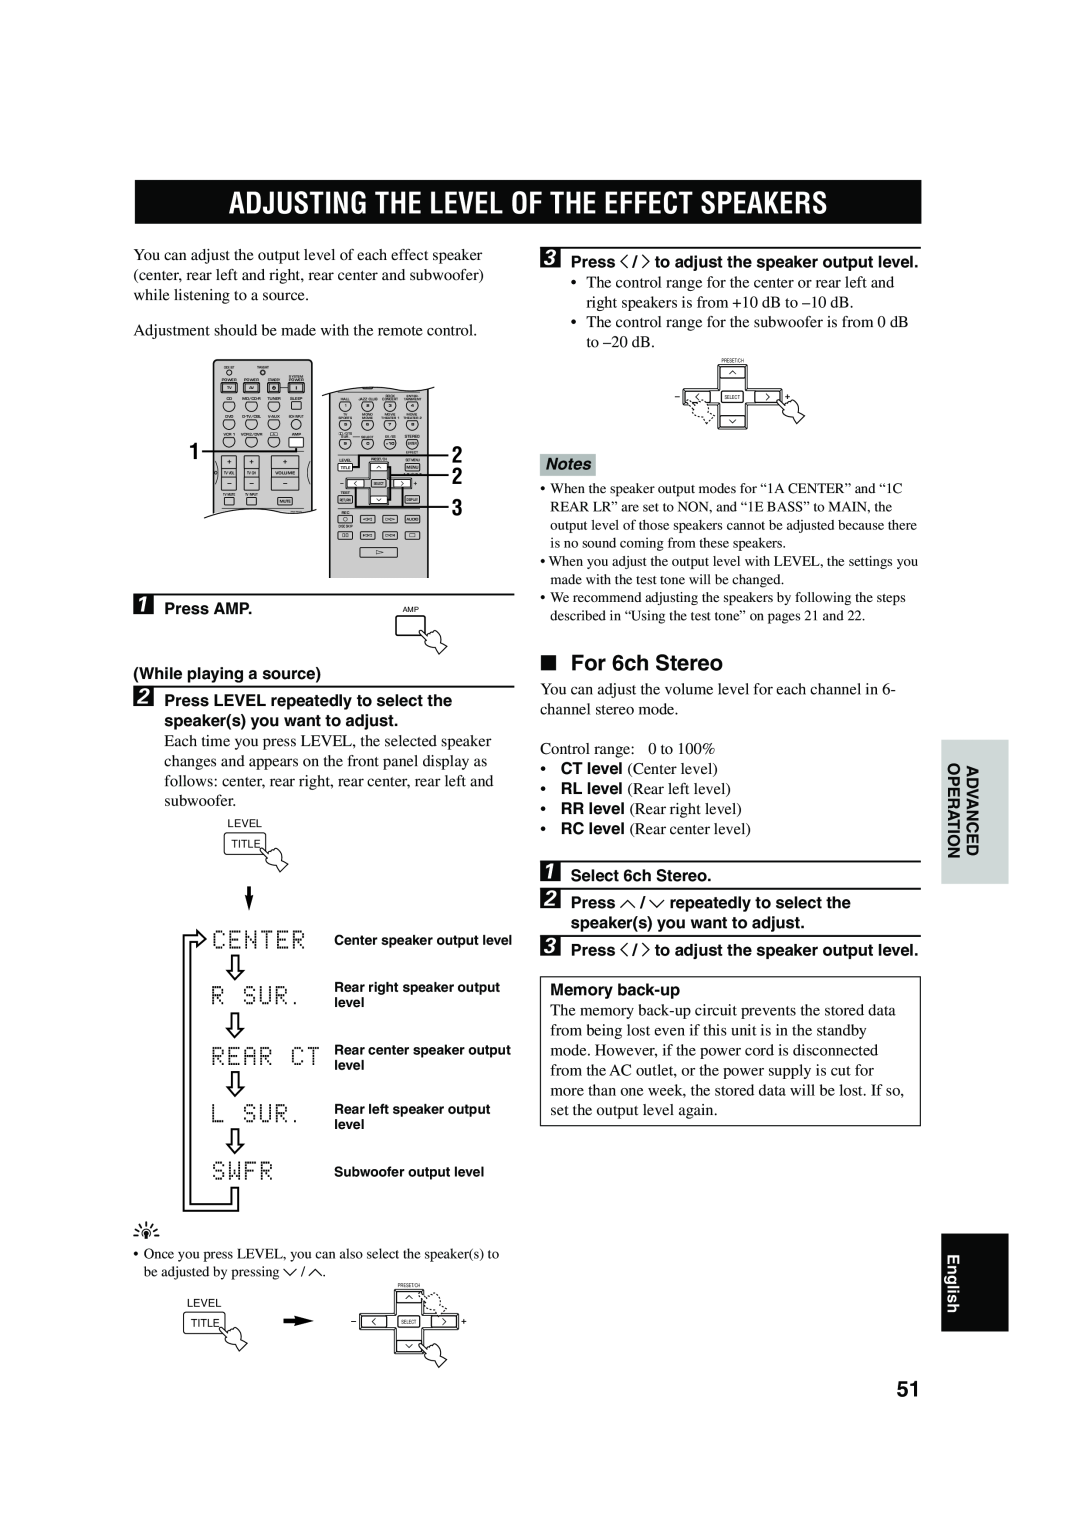 Yamaha RX-V630RDS owner manual Adjusting The Level Of The Effect Speakers, For 6ch Stereo, Notes, English 